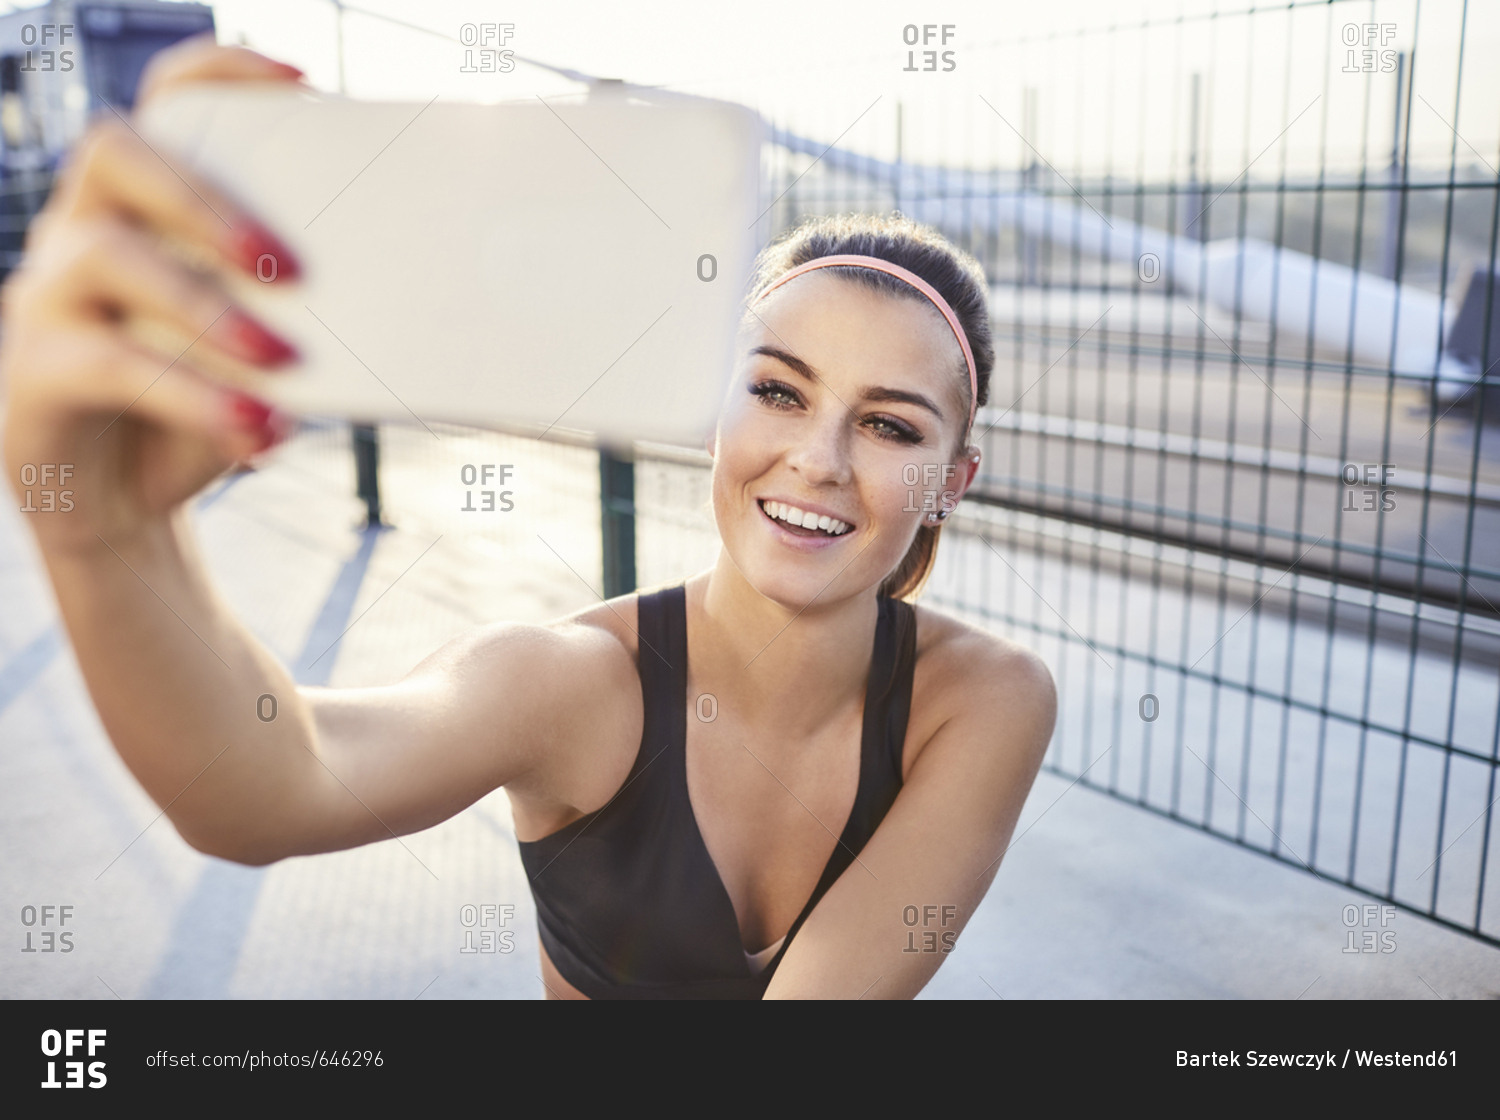 Fit woman taking selfie after outdoor workout